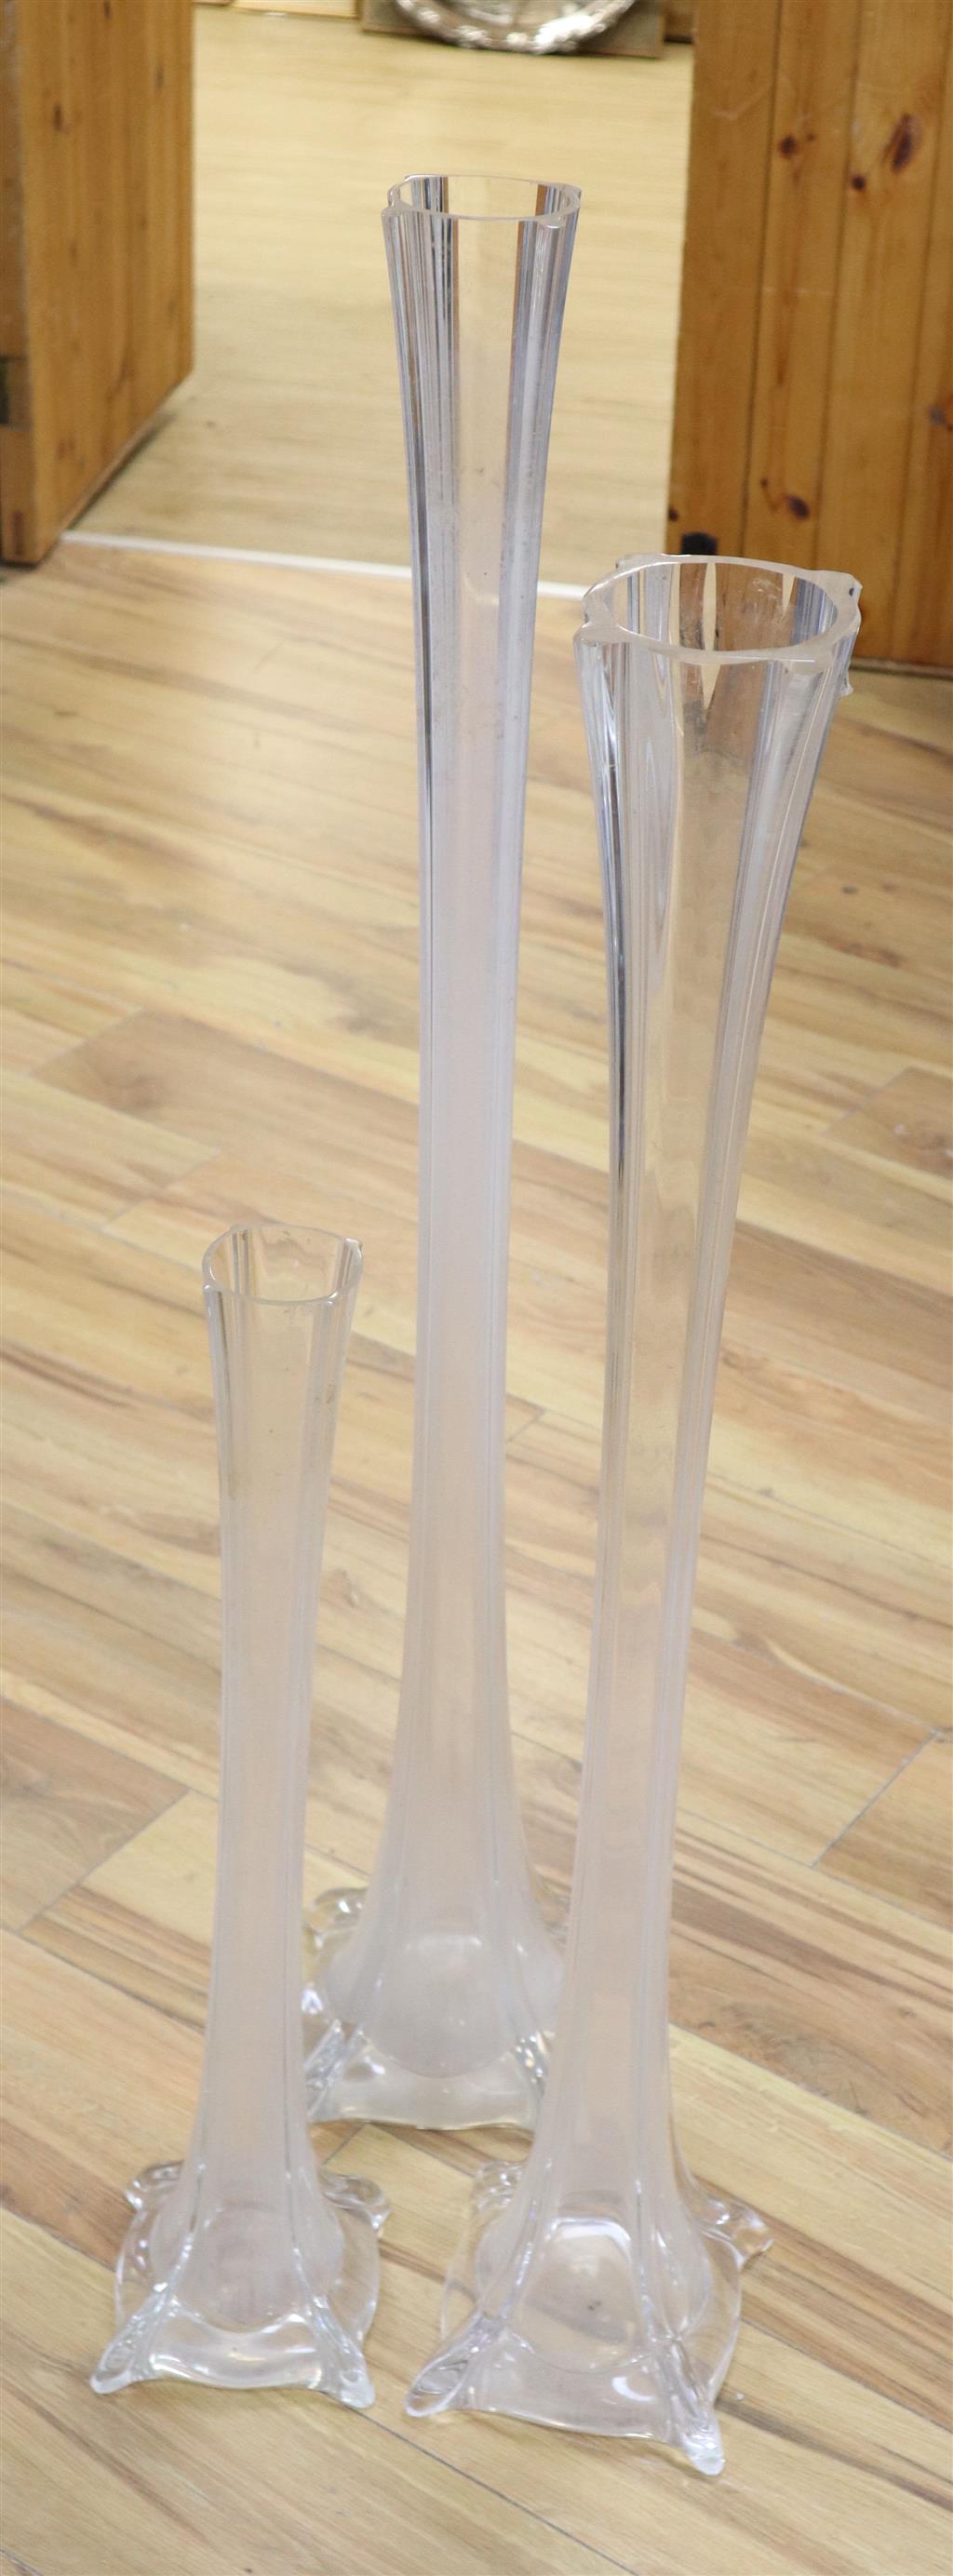 A tall waisted hand-blown glass vase by Industria Vetraria Valdarnese (IVV), Italy and two similar vases, tallest approx H 99cm